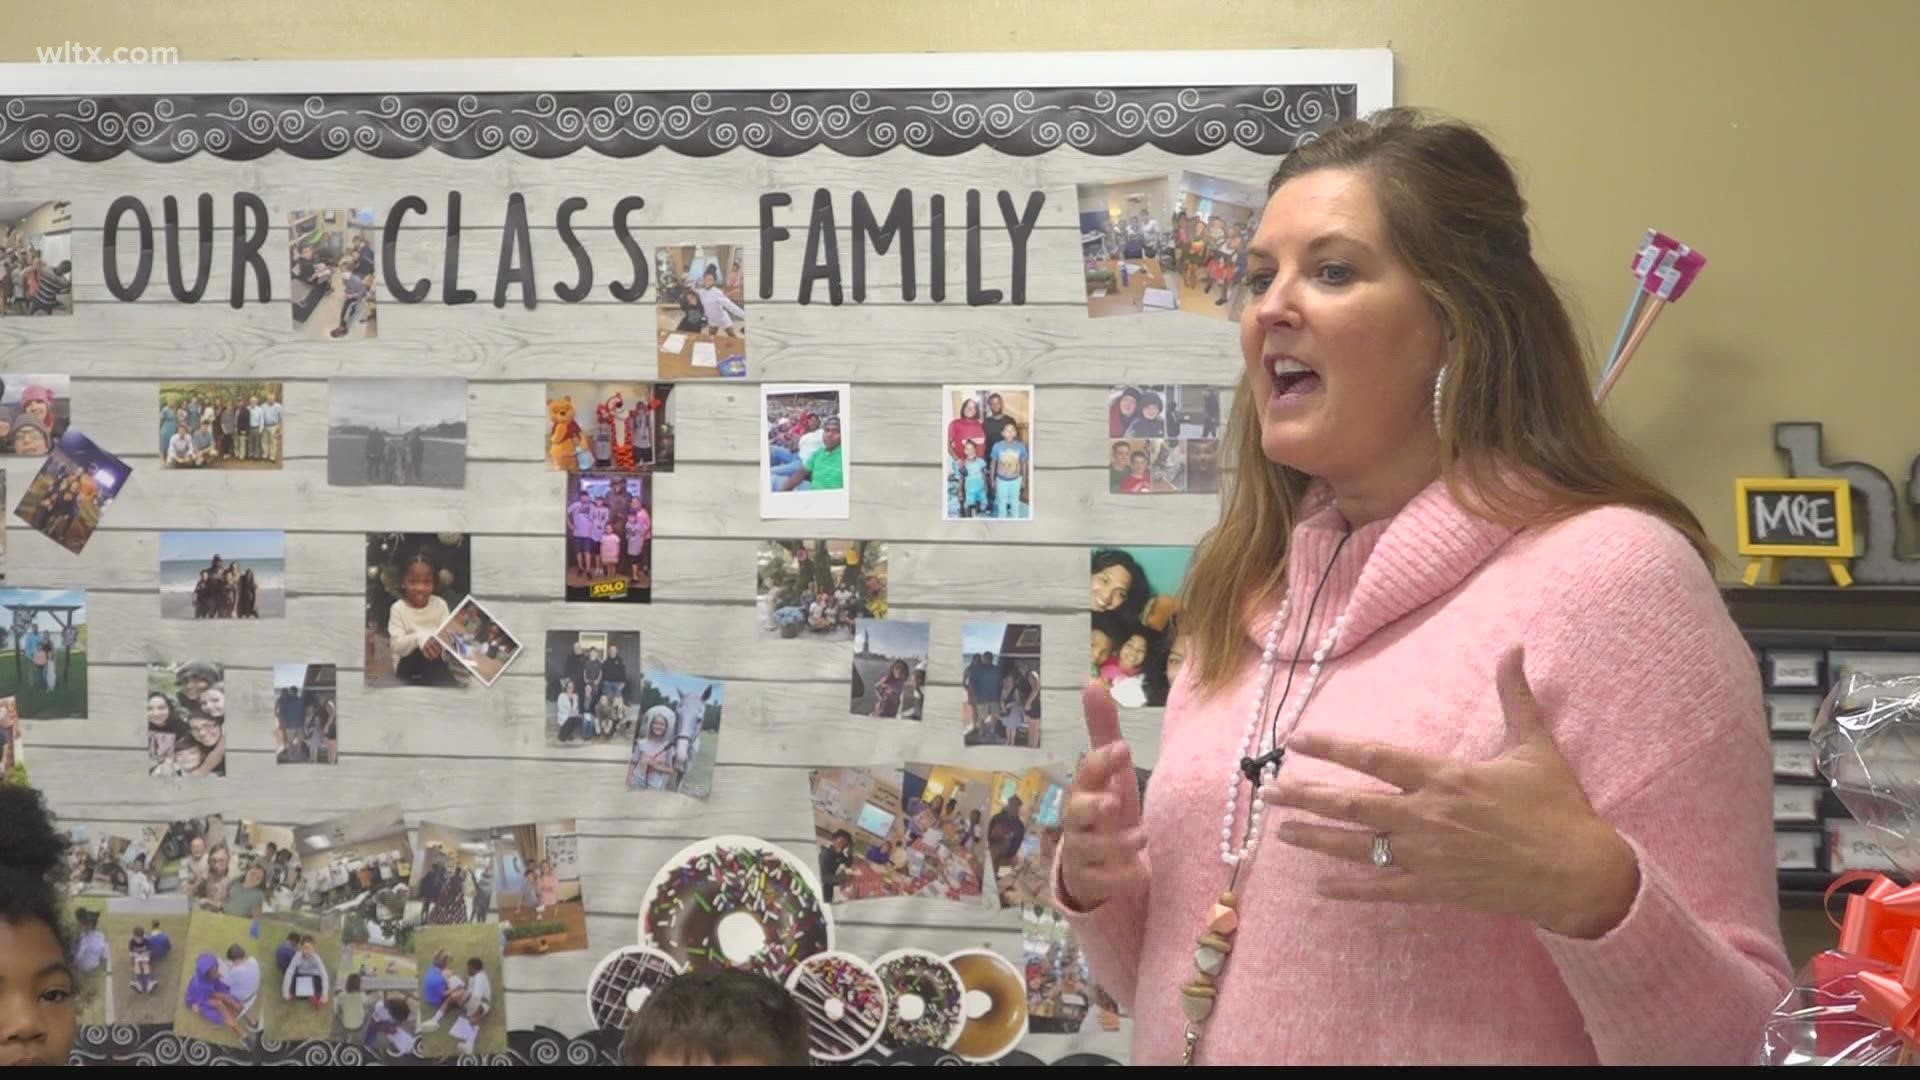 Kerry Fuller at Pinetree Elementary in Kershaw County has been described as a rock star educator. In fact, she was recently her school's Teacher of the Year.